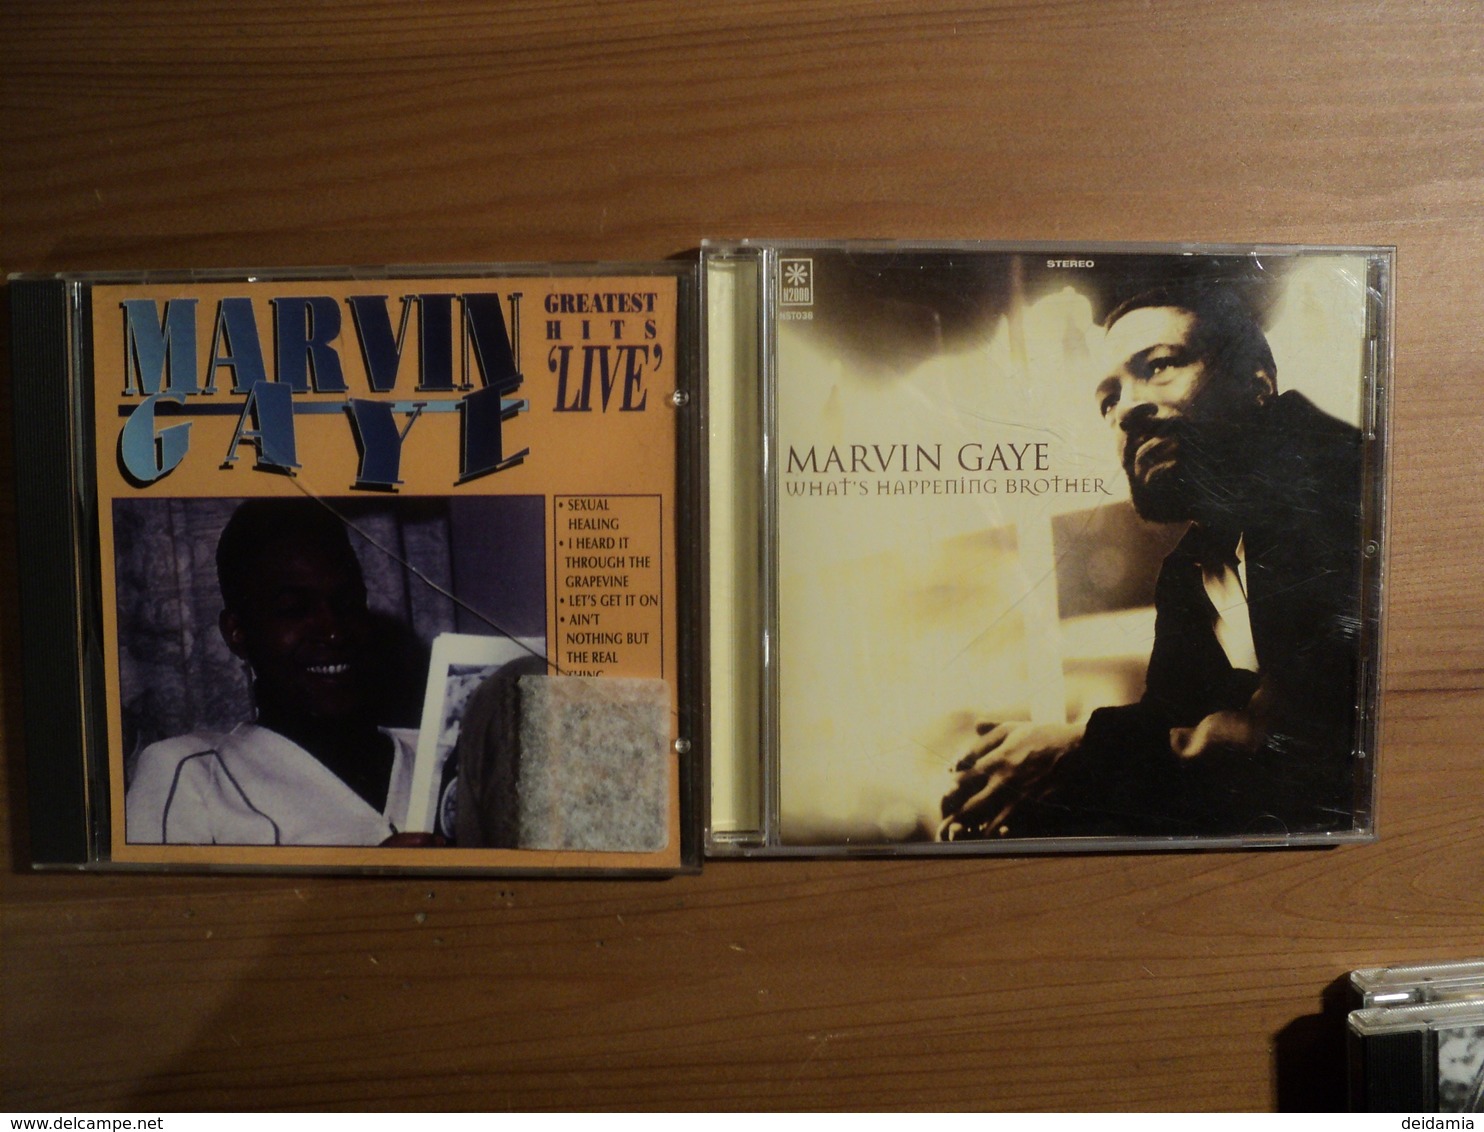 PAIRE DE CD MARVIN GAYE. 1993 / 1999. GREATEST HITS LIVE / WHAT S HAPPENING BROTHER 3880772 / NST036. - Soul - R&B